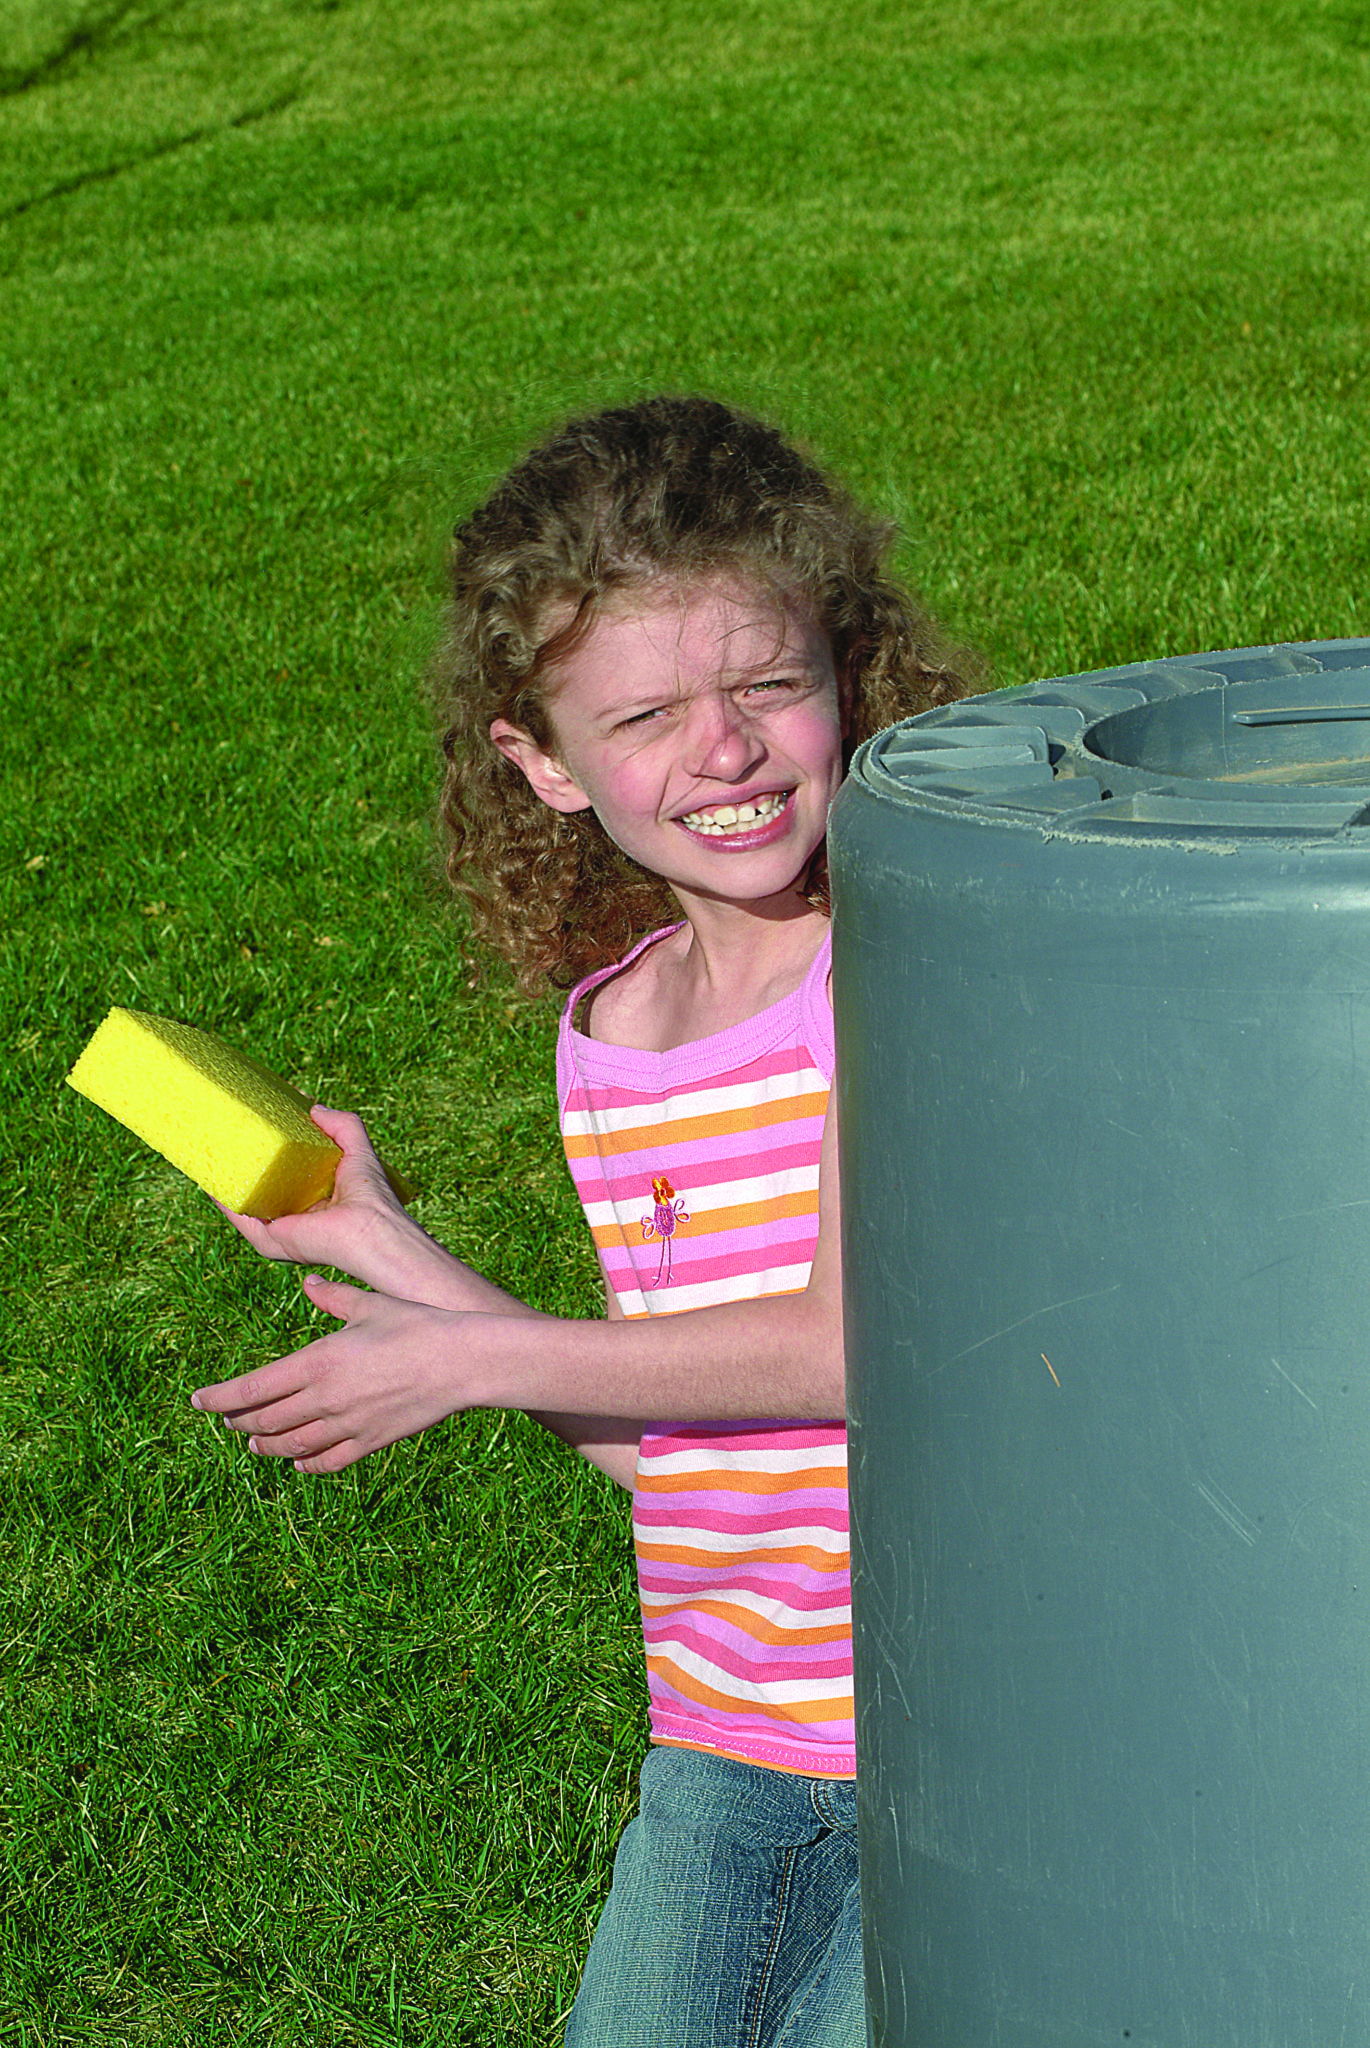 A girl hides behind a huge trash can with a sponge.